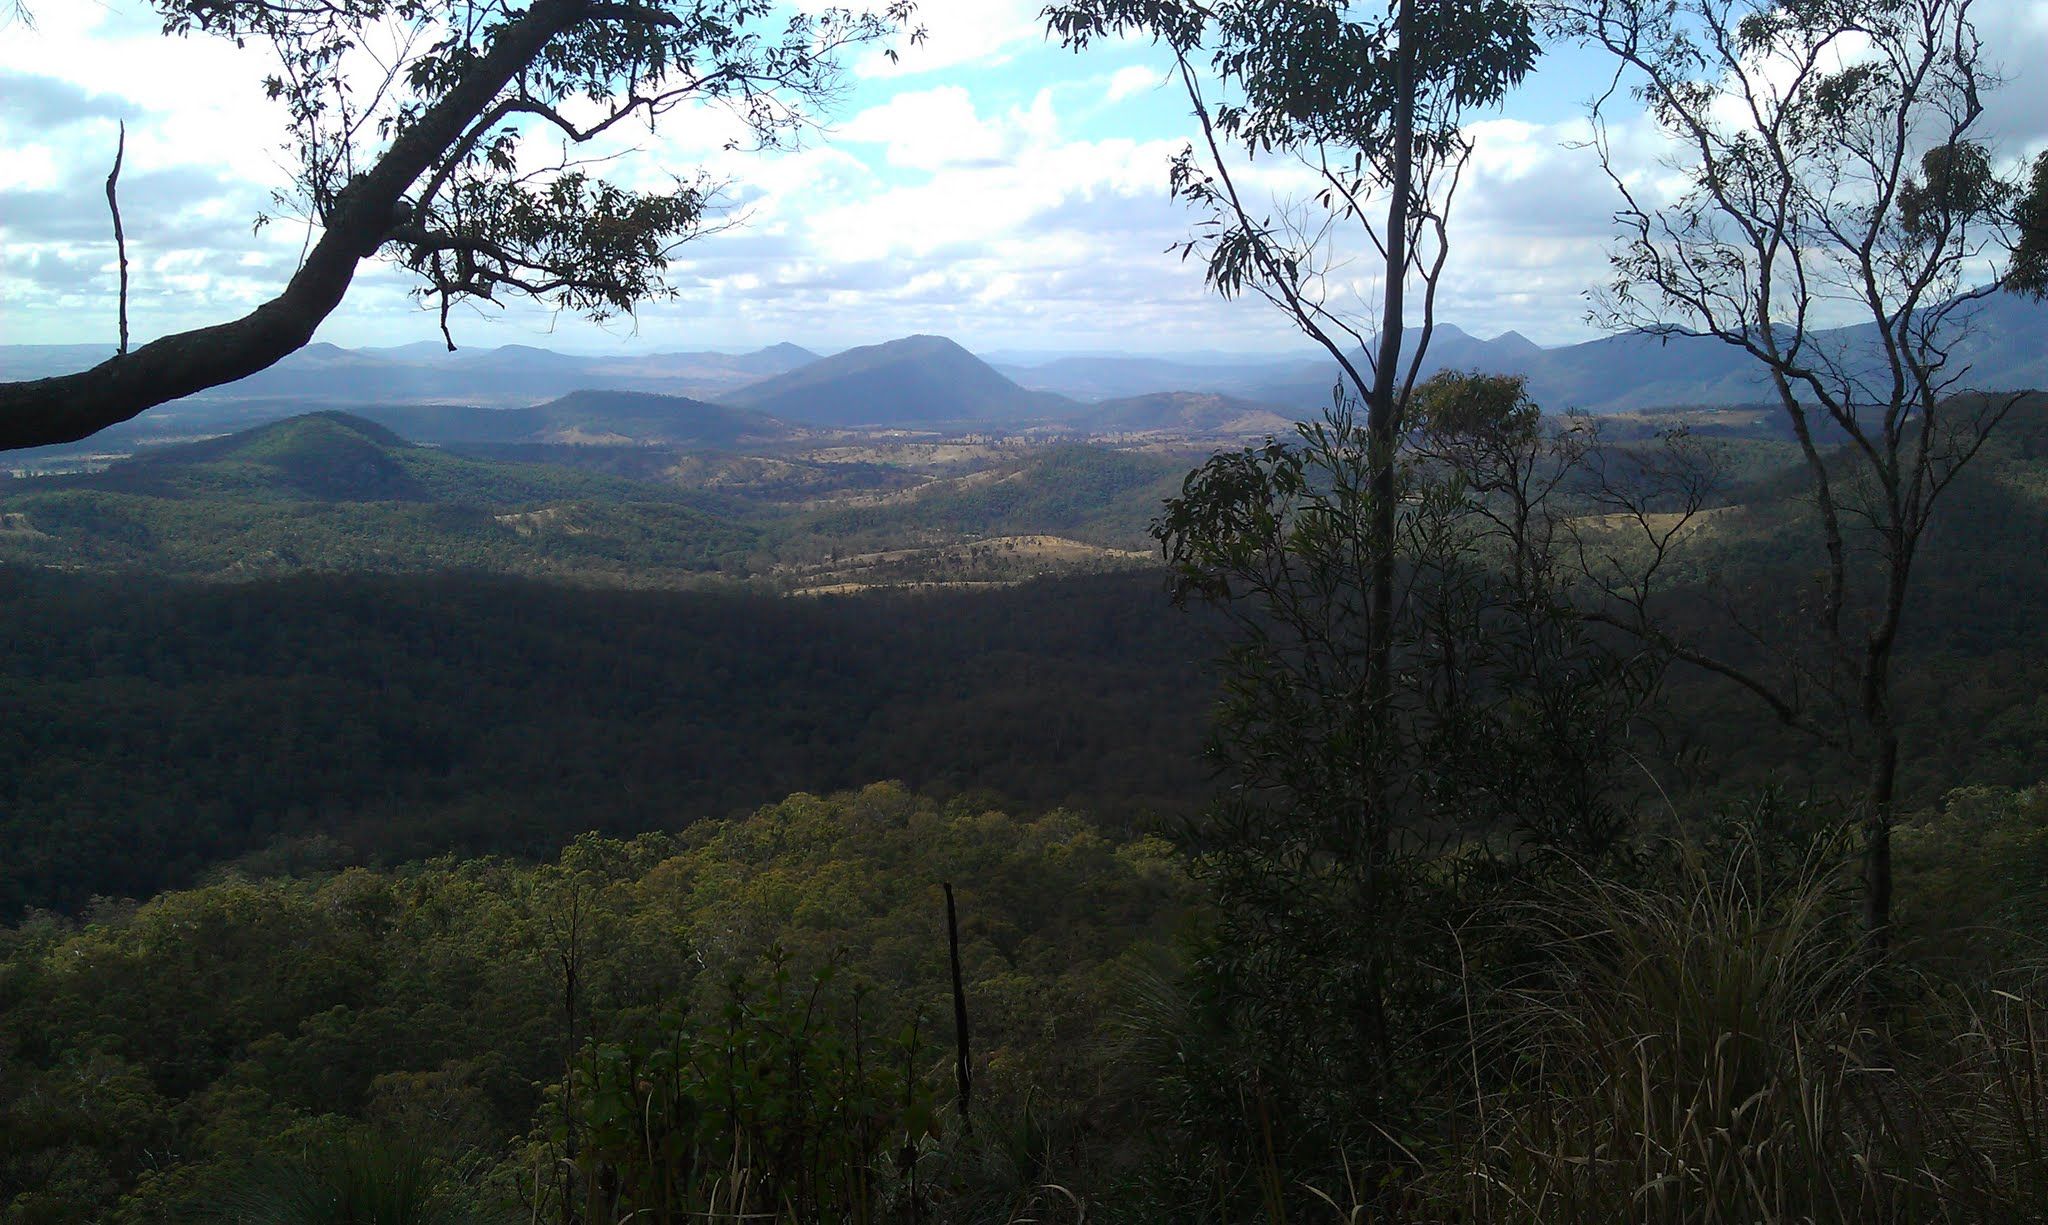 The view from The Head, after a long, windey climb.